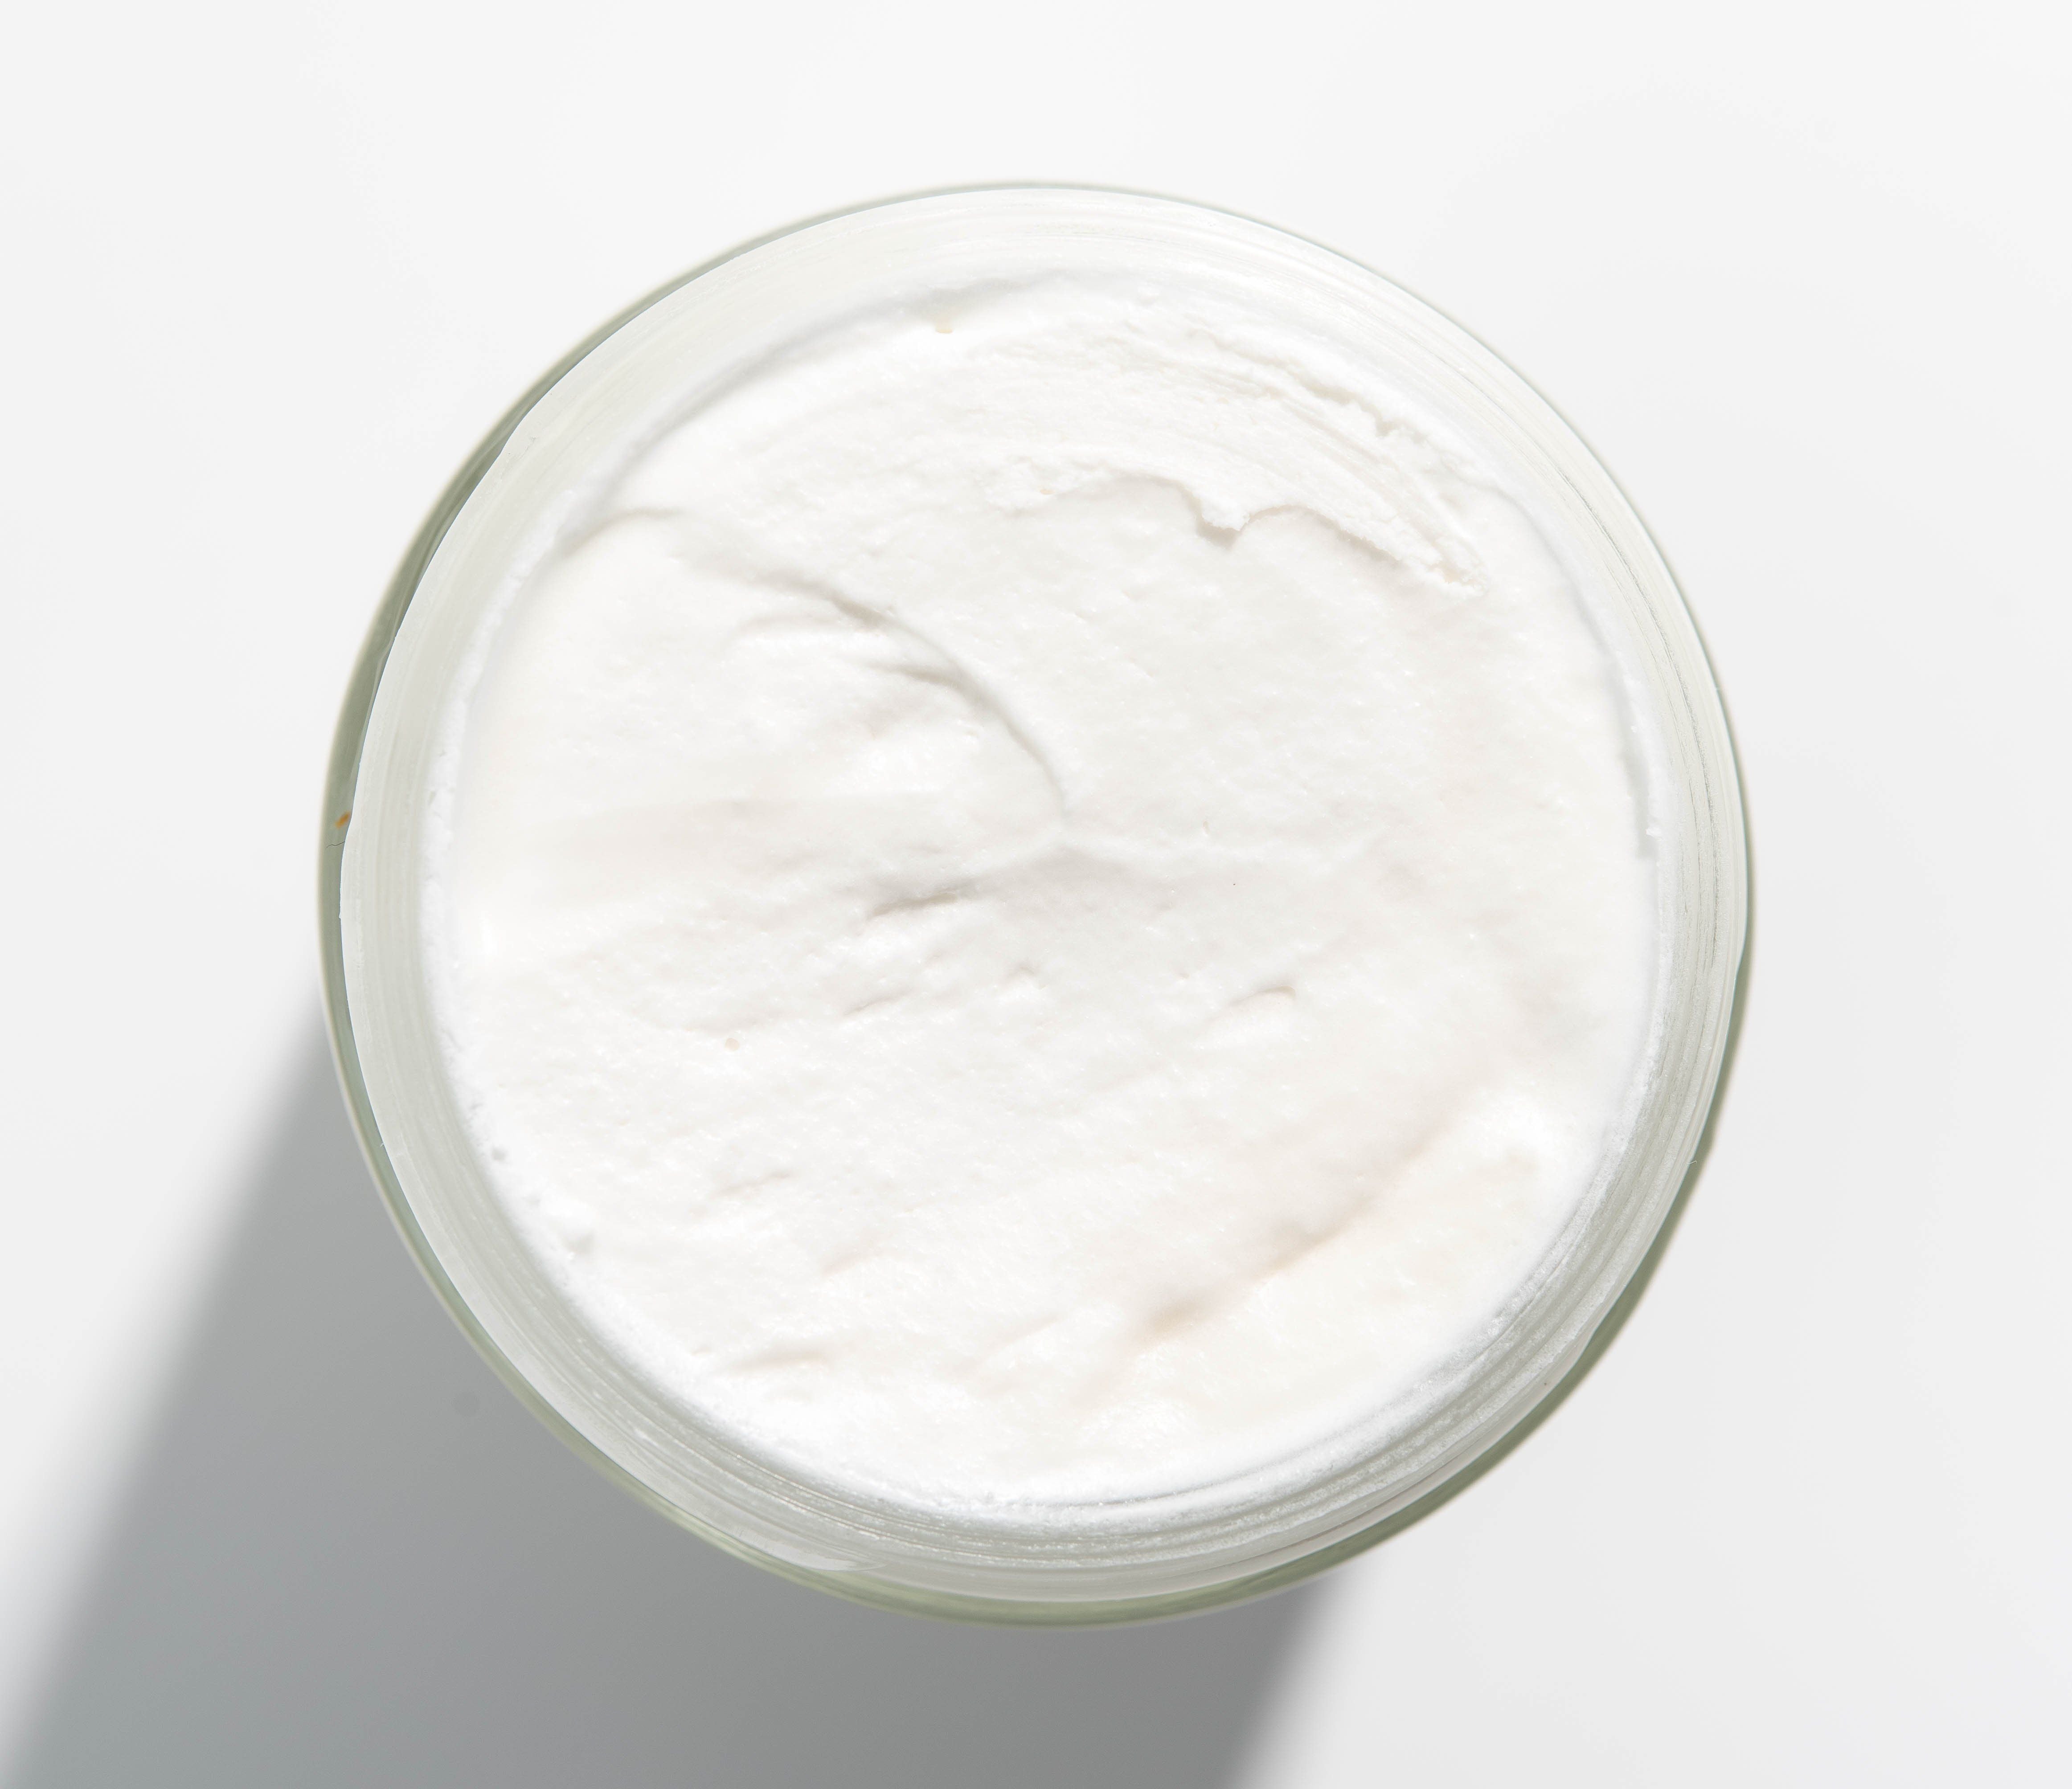 Nomad Body Butter